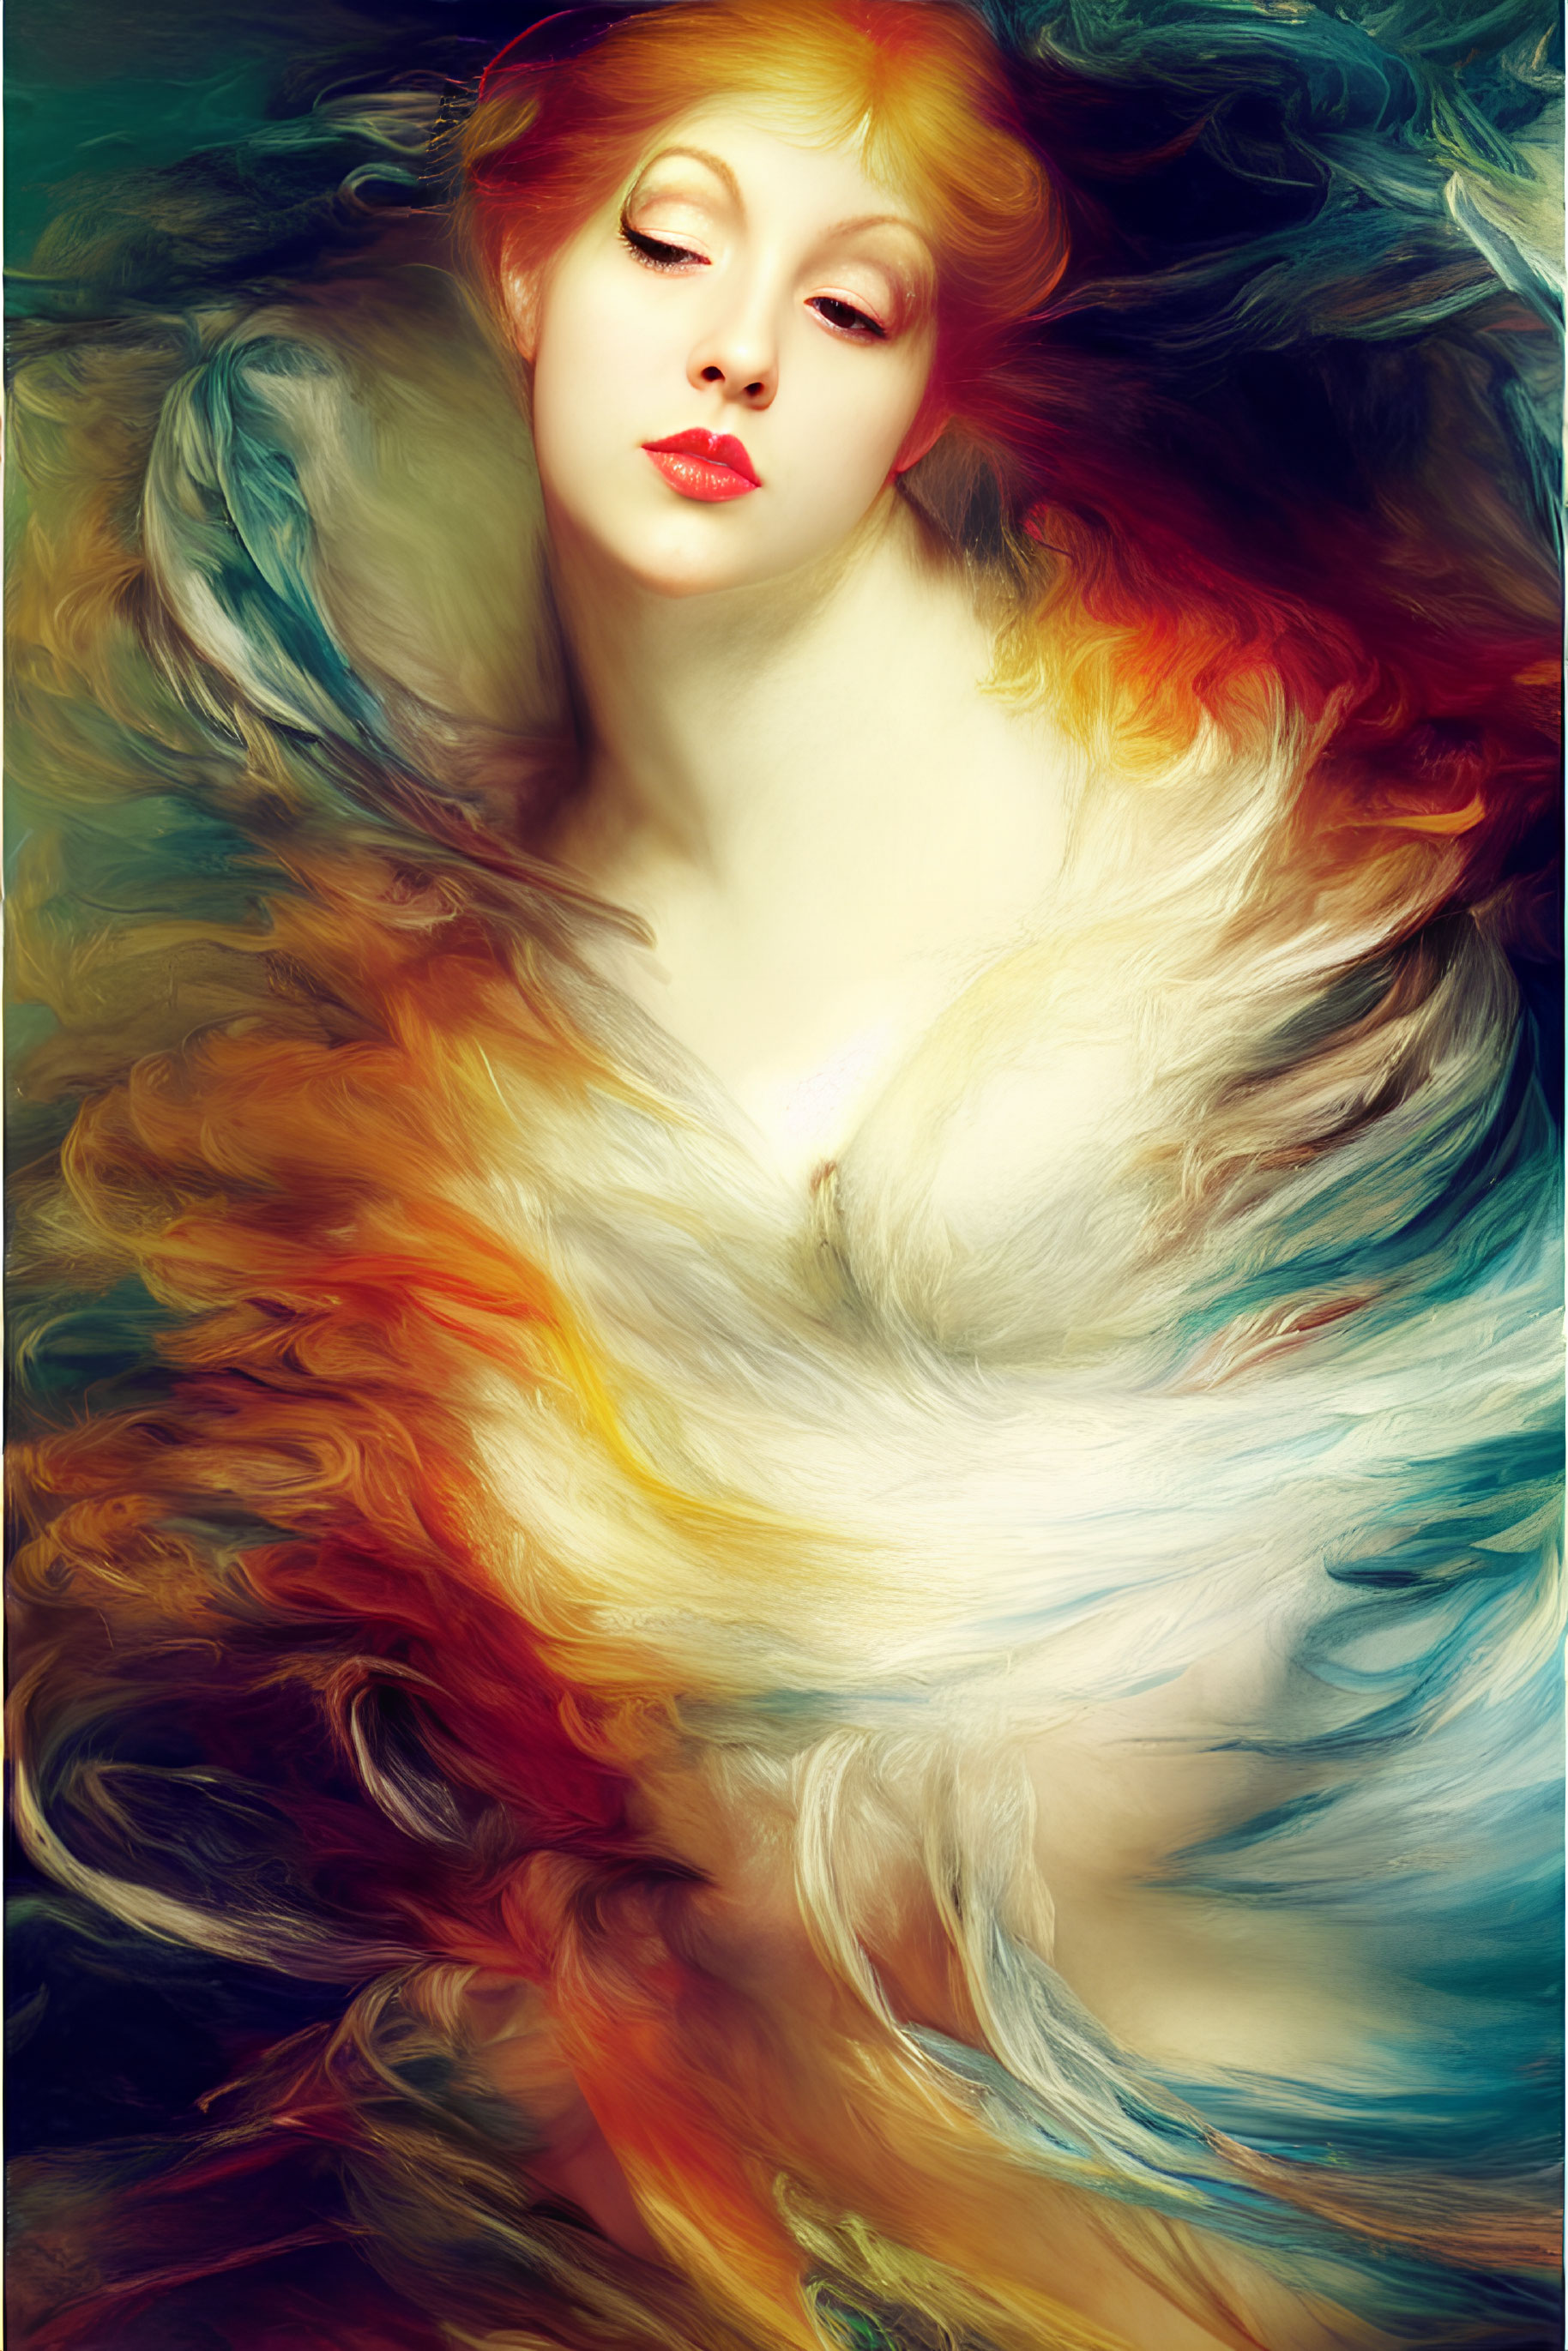 Vibrant portrait of a woman with flowing hair and swirling colors